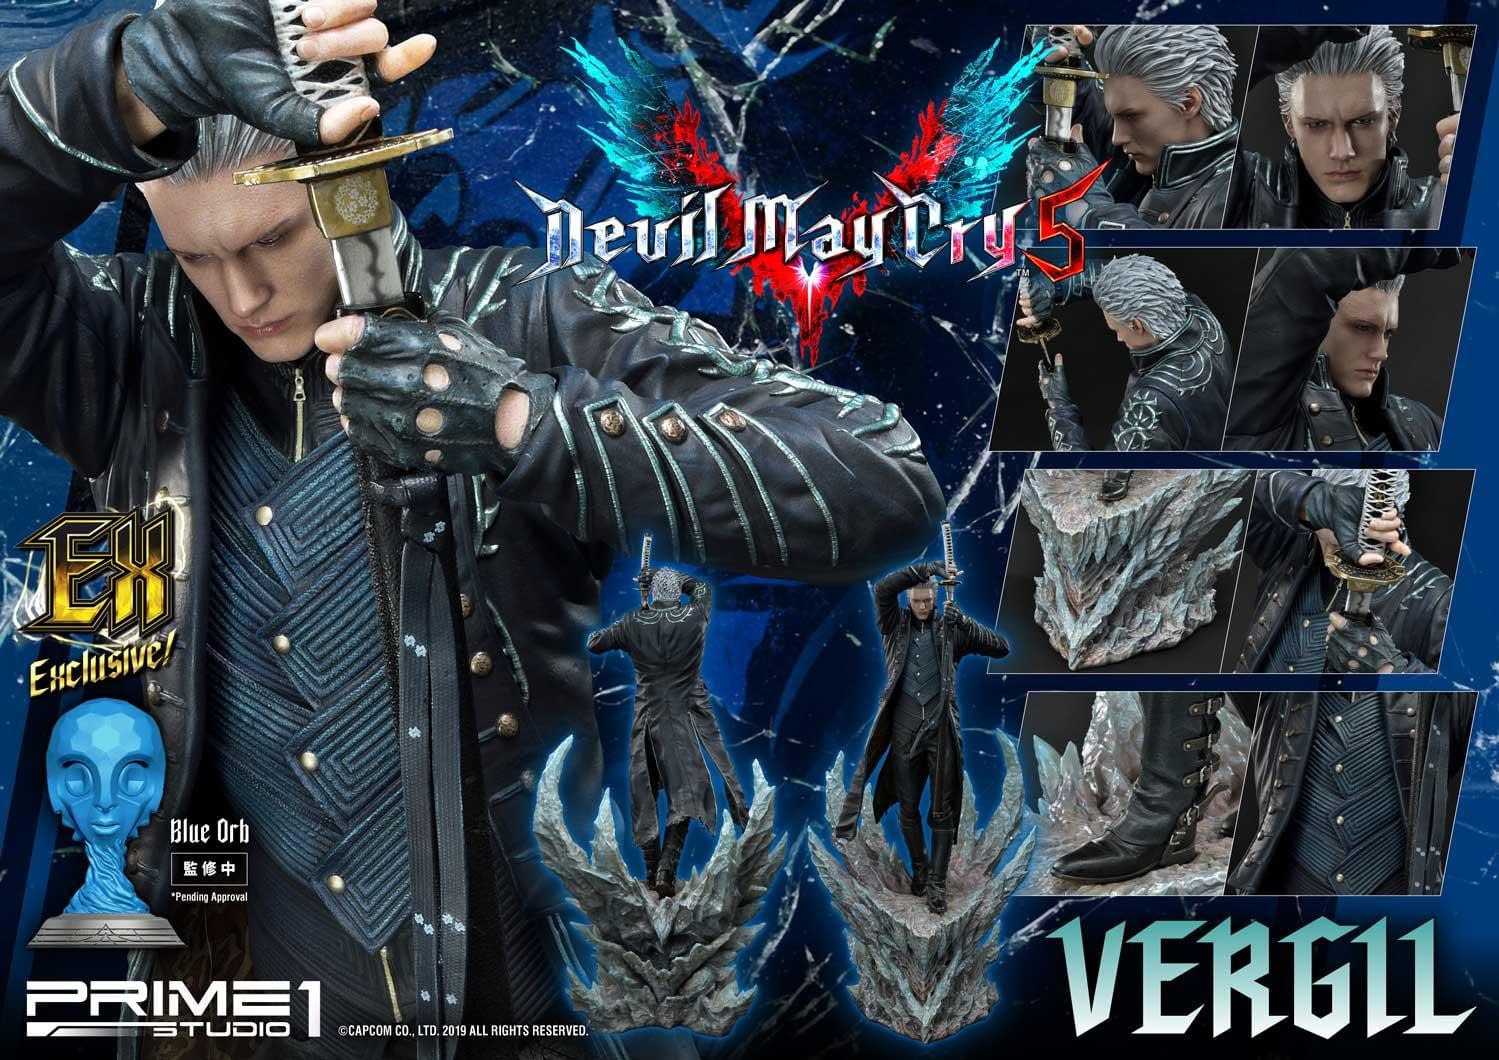 "Devil May Cry 5" Vergil Gets New Statue From Prime 1 Studio